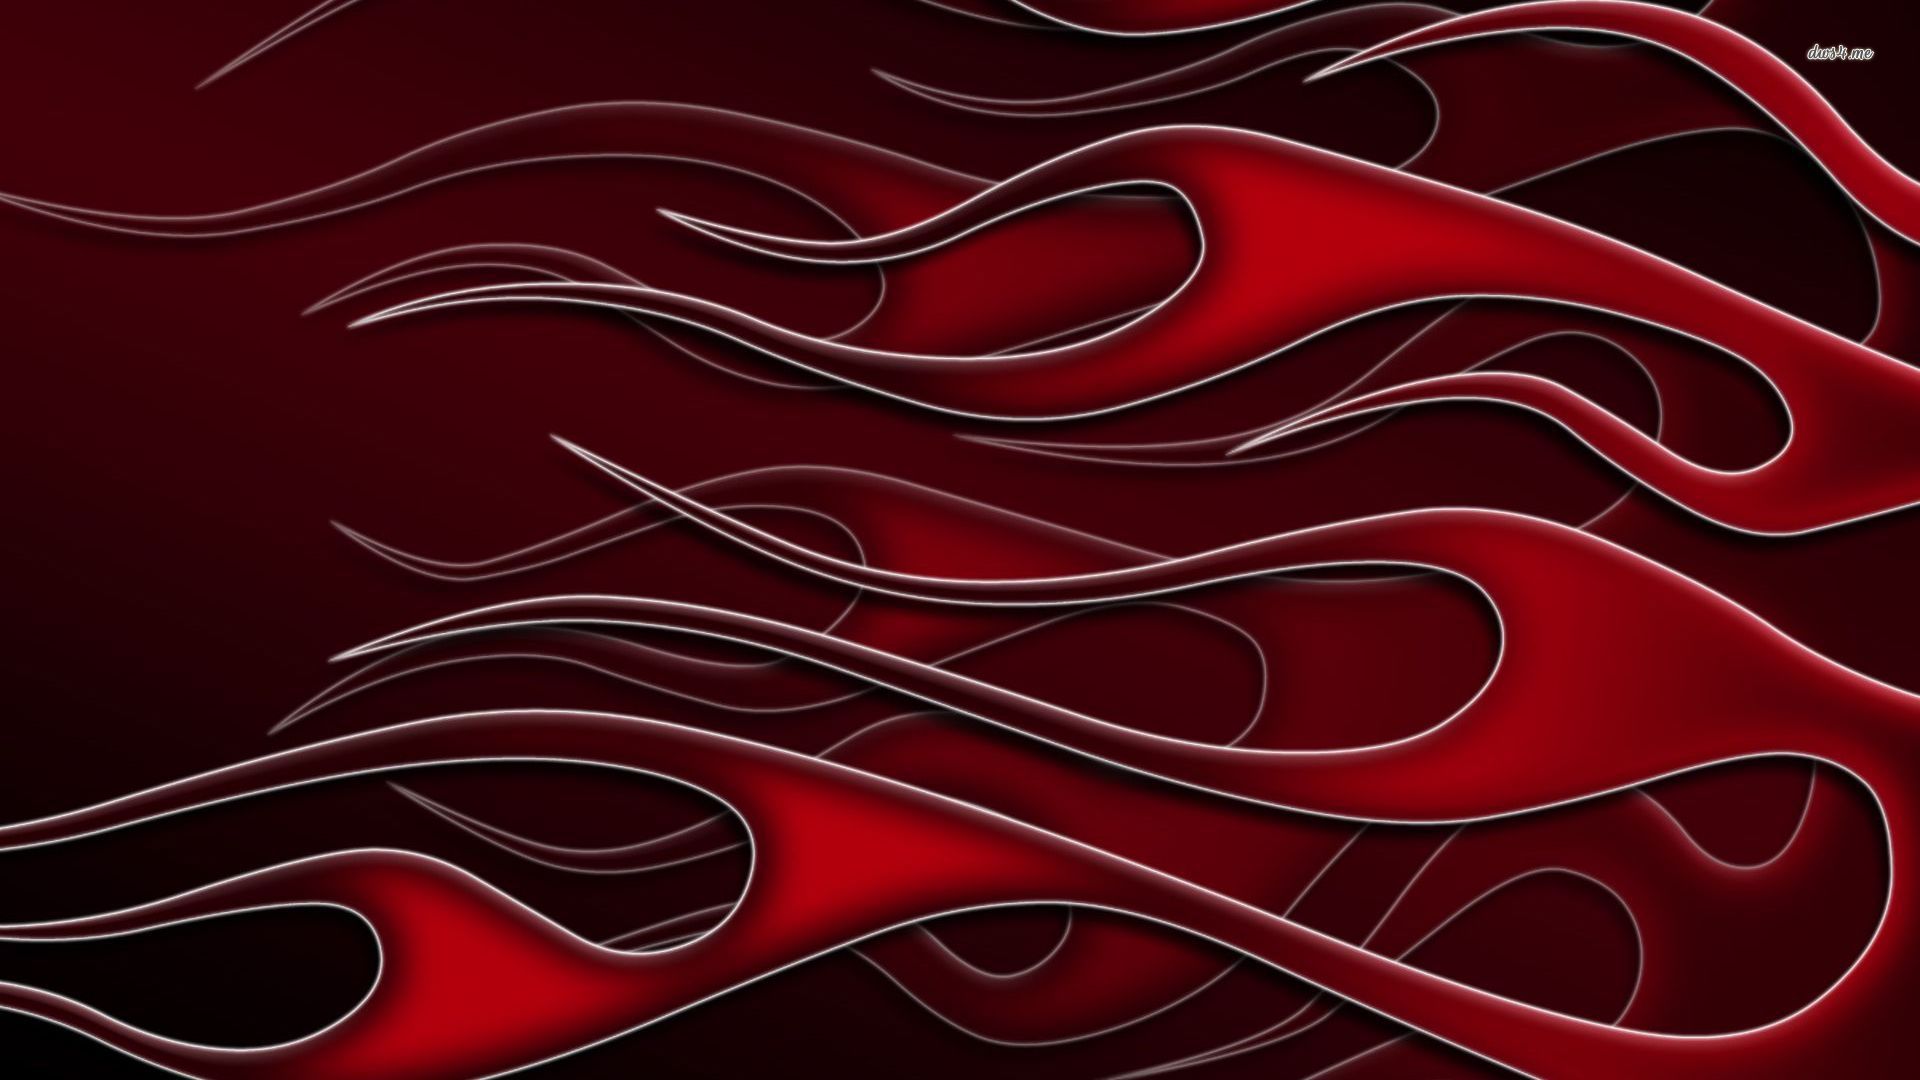 Flames Wallpaper 30737 Hd Wallpapers Background 1920x1080